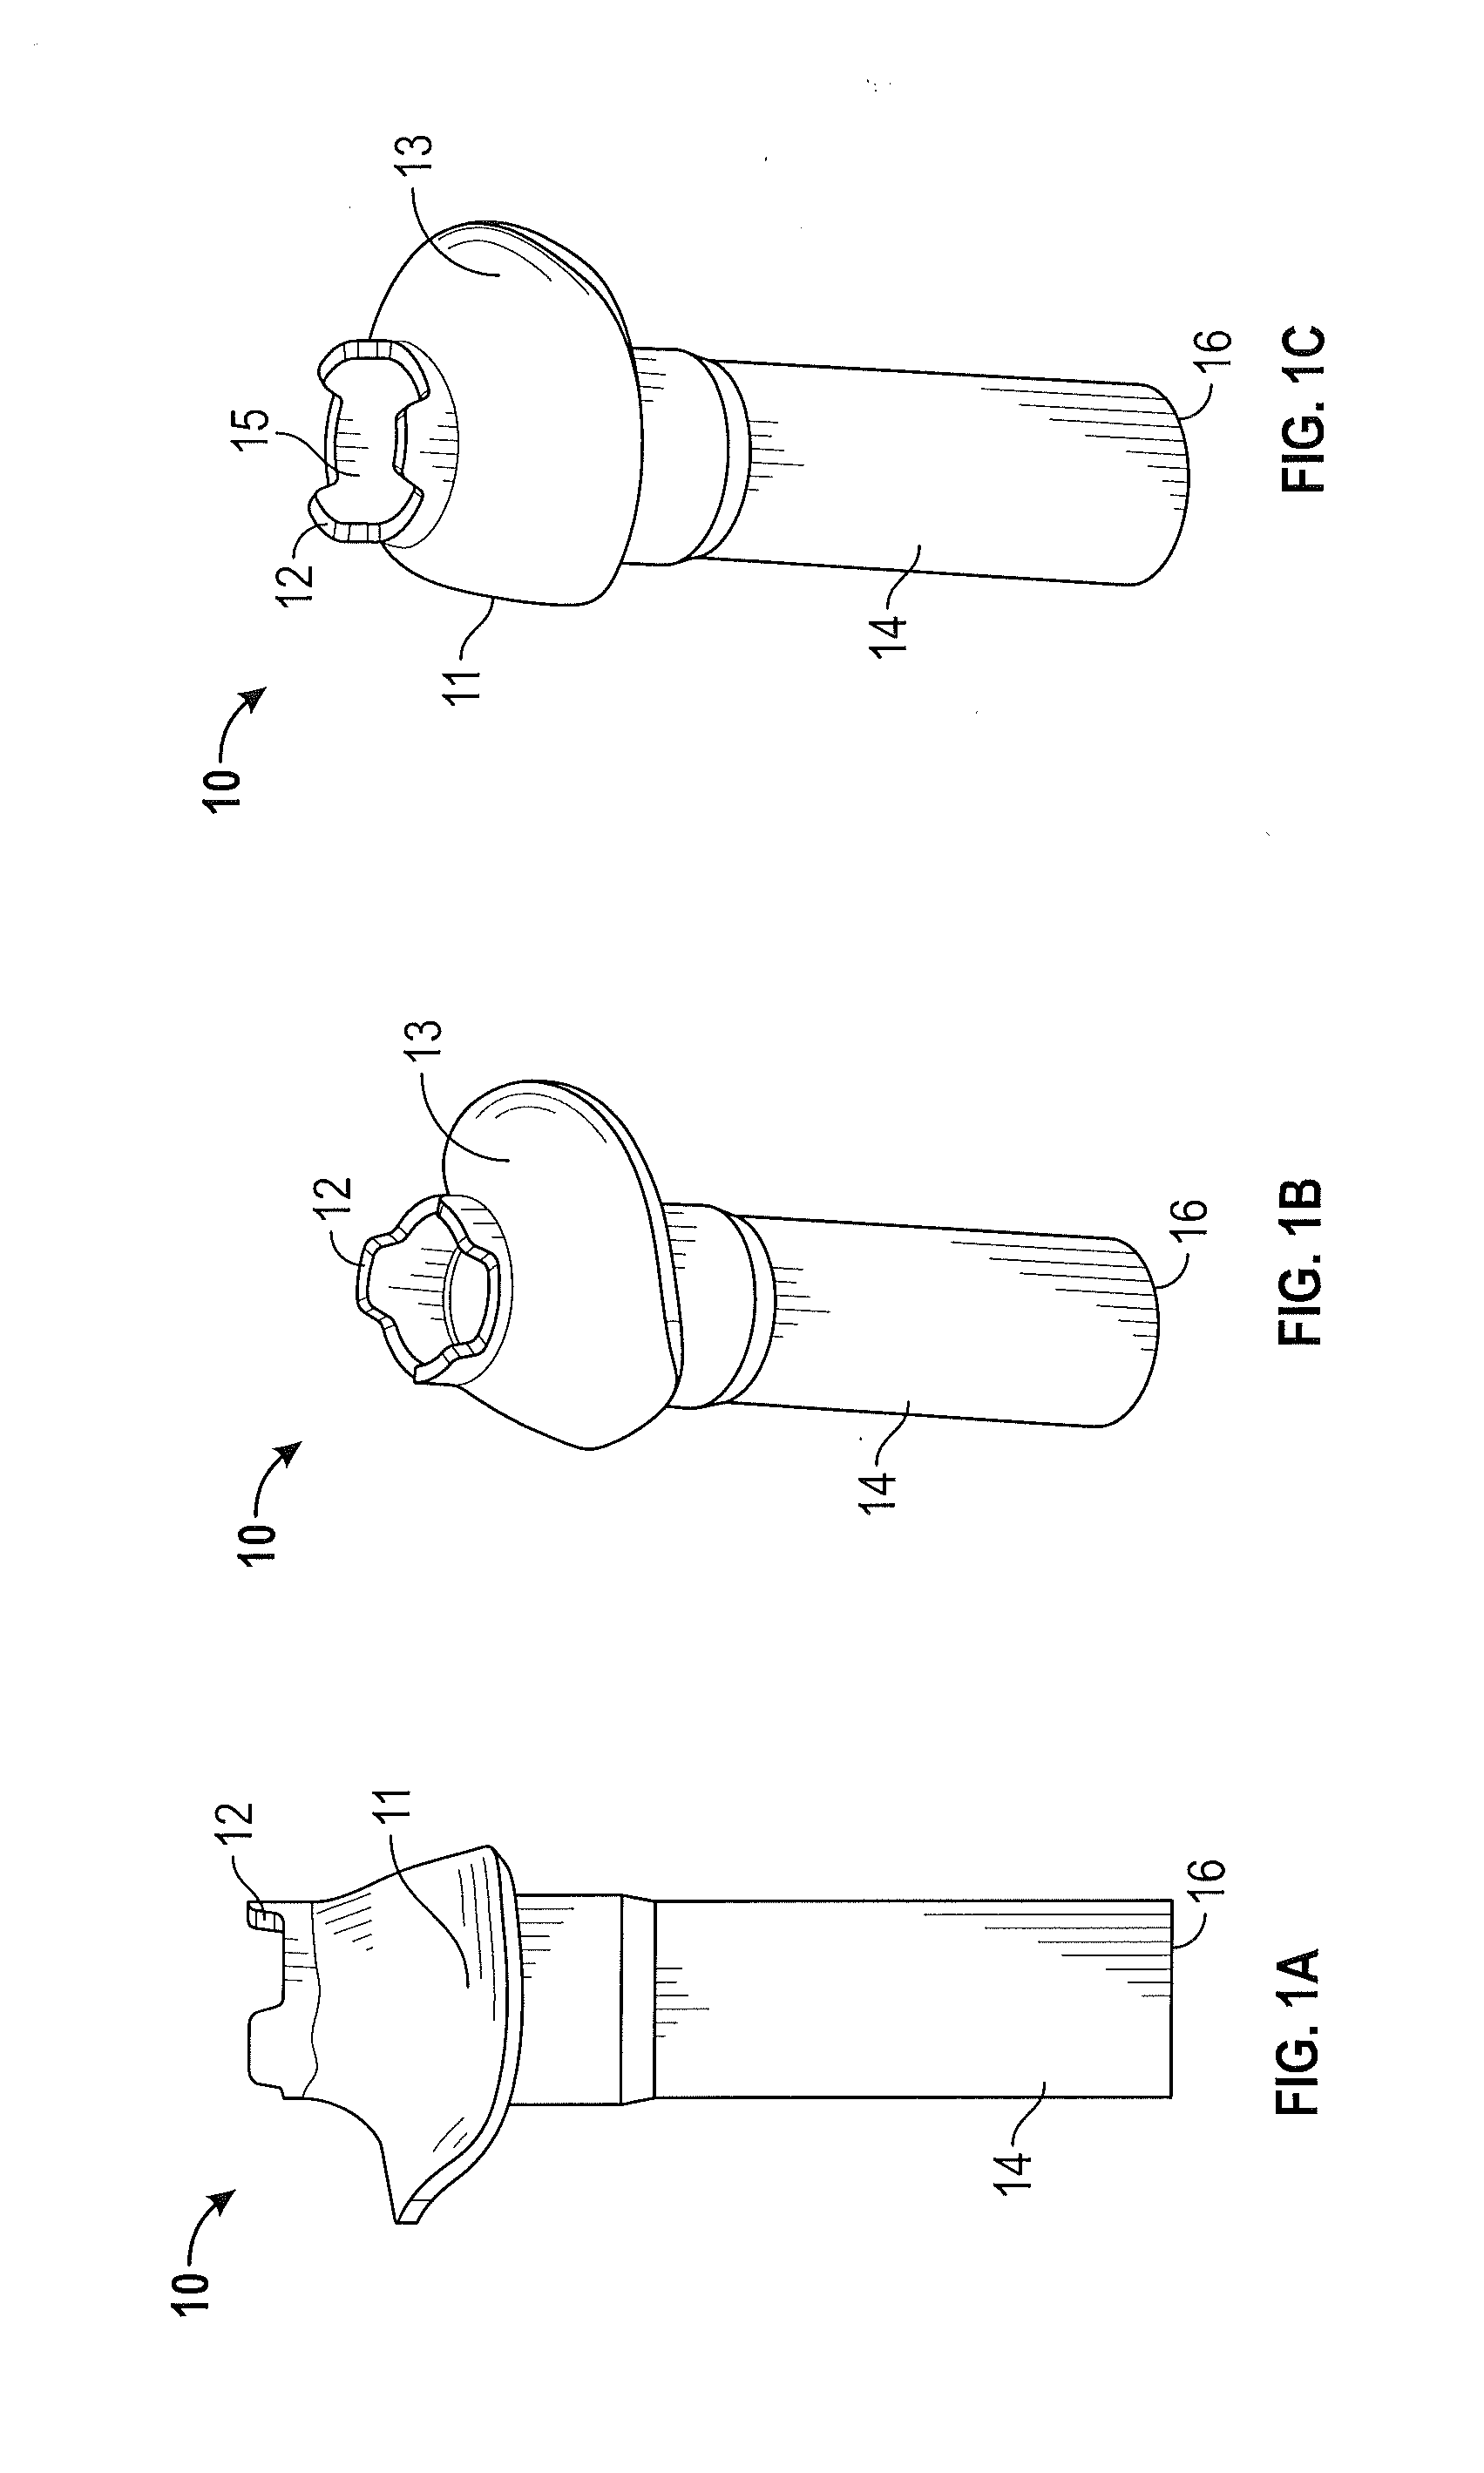 Multi-piece driver with separately cast hosel